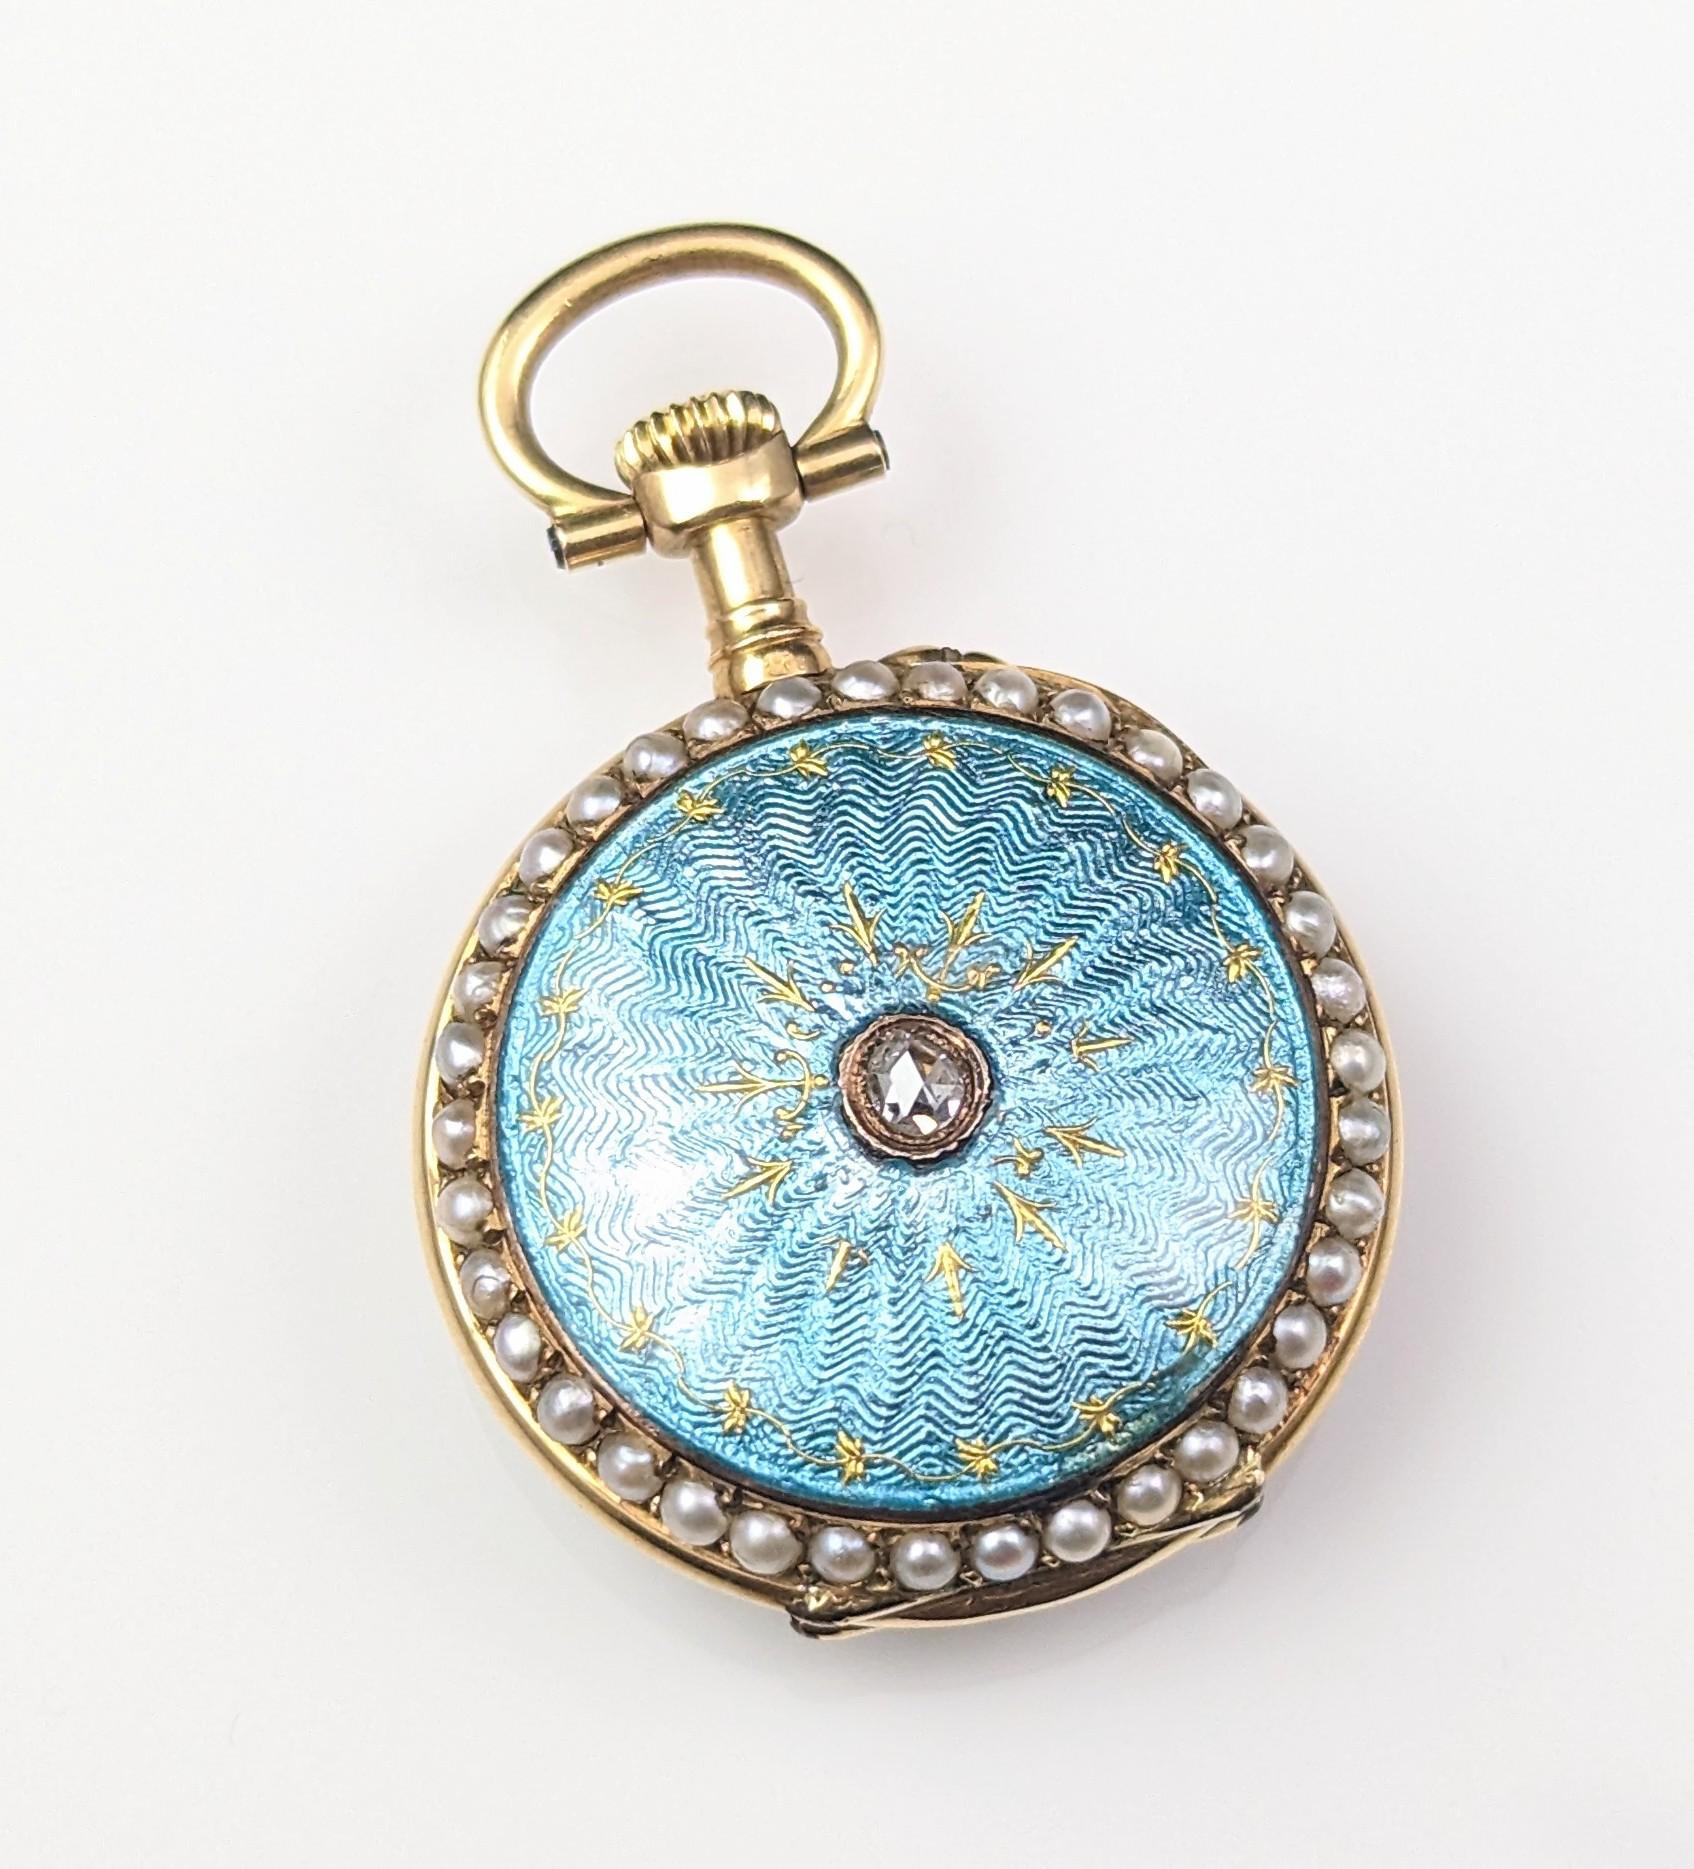 Antique Diamond and Pearl Fob Watch, 18 Karat Gold, Guilloche Enamel 9